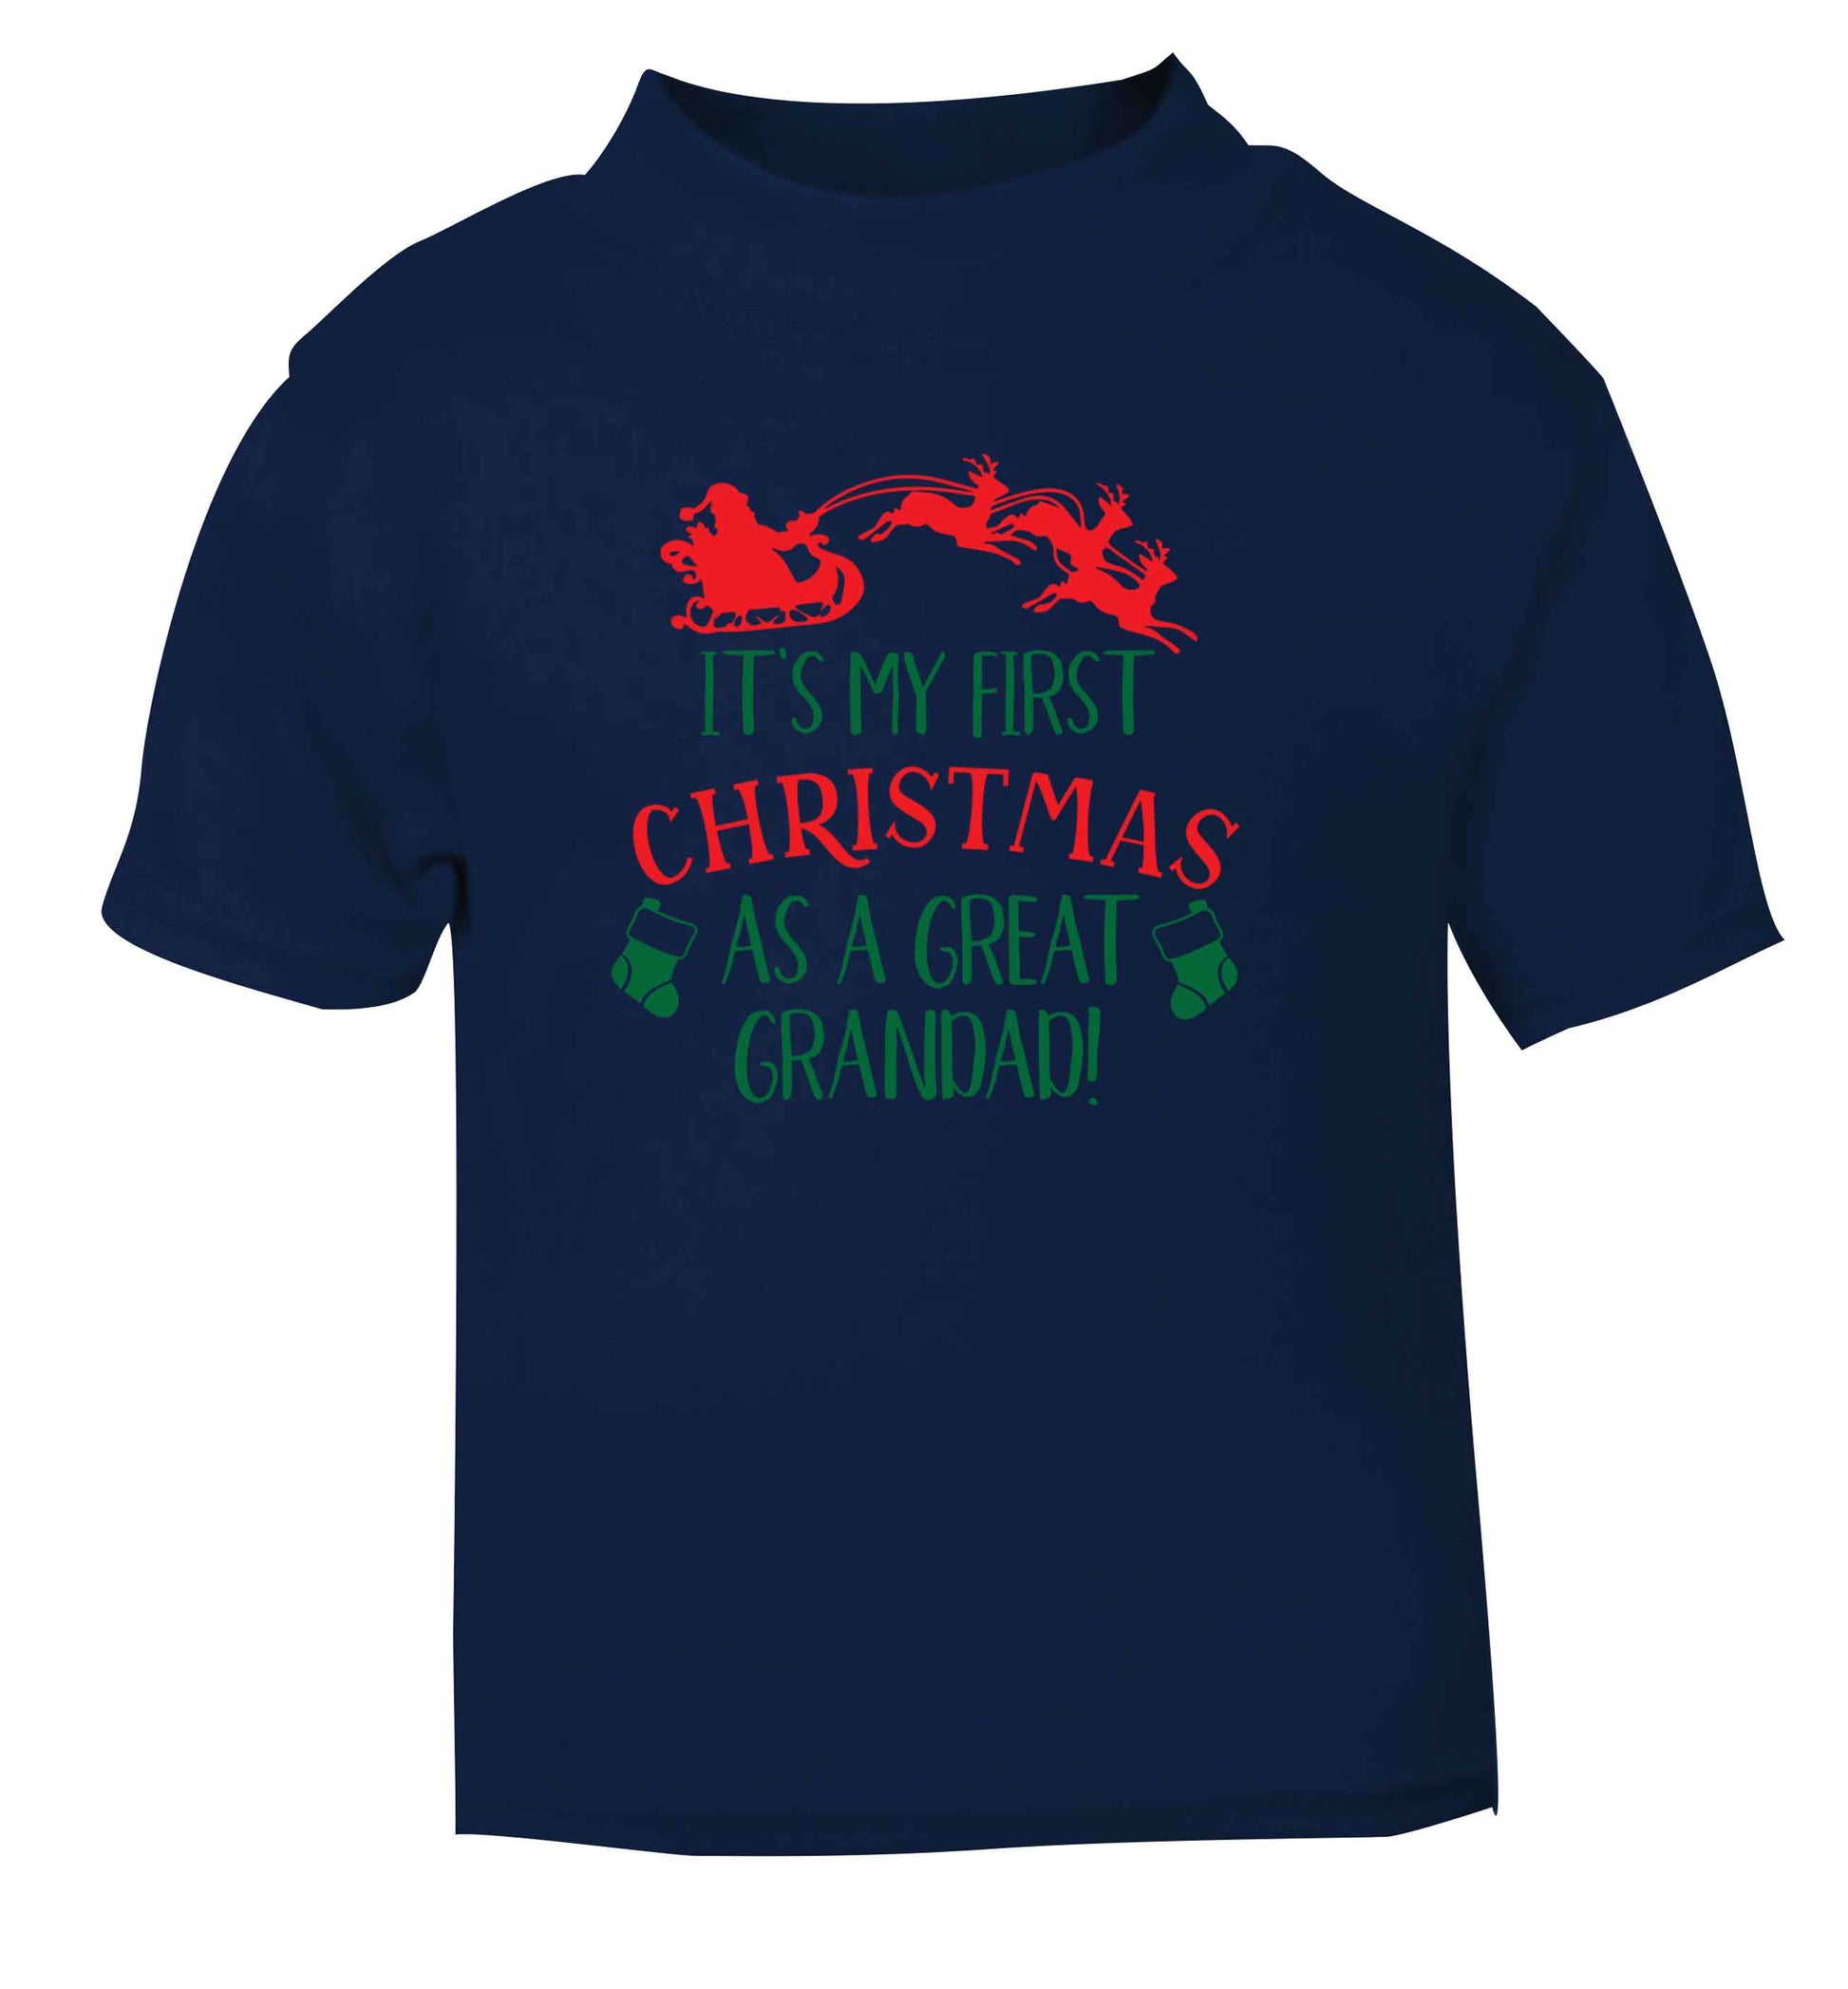 It's my first Christmas as a great grandad! navy Baby Toddler Tshirt 2 Years